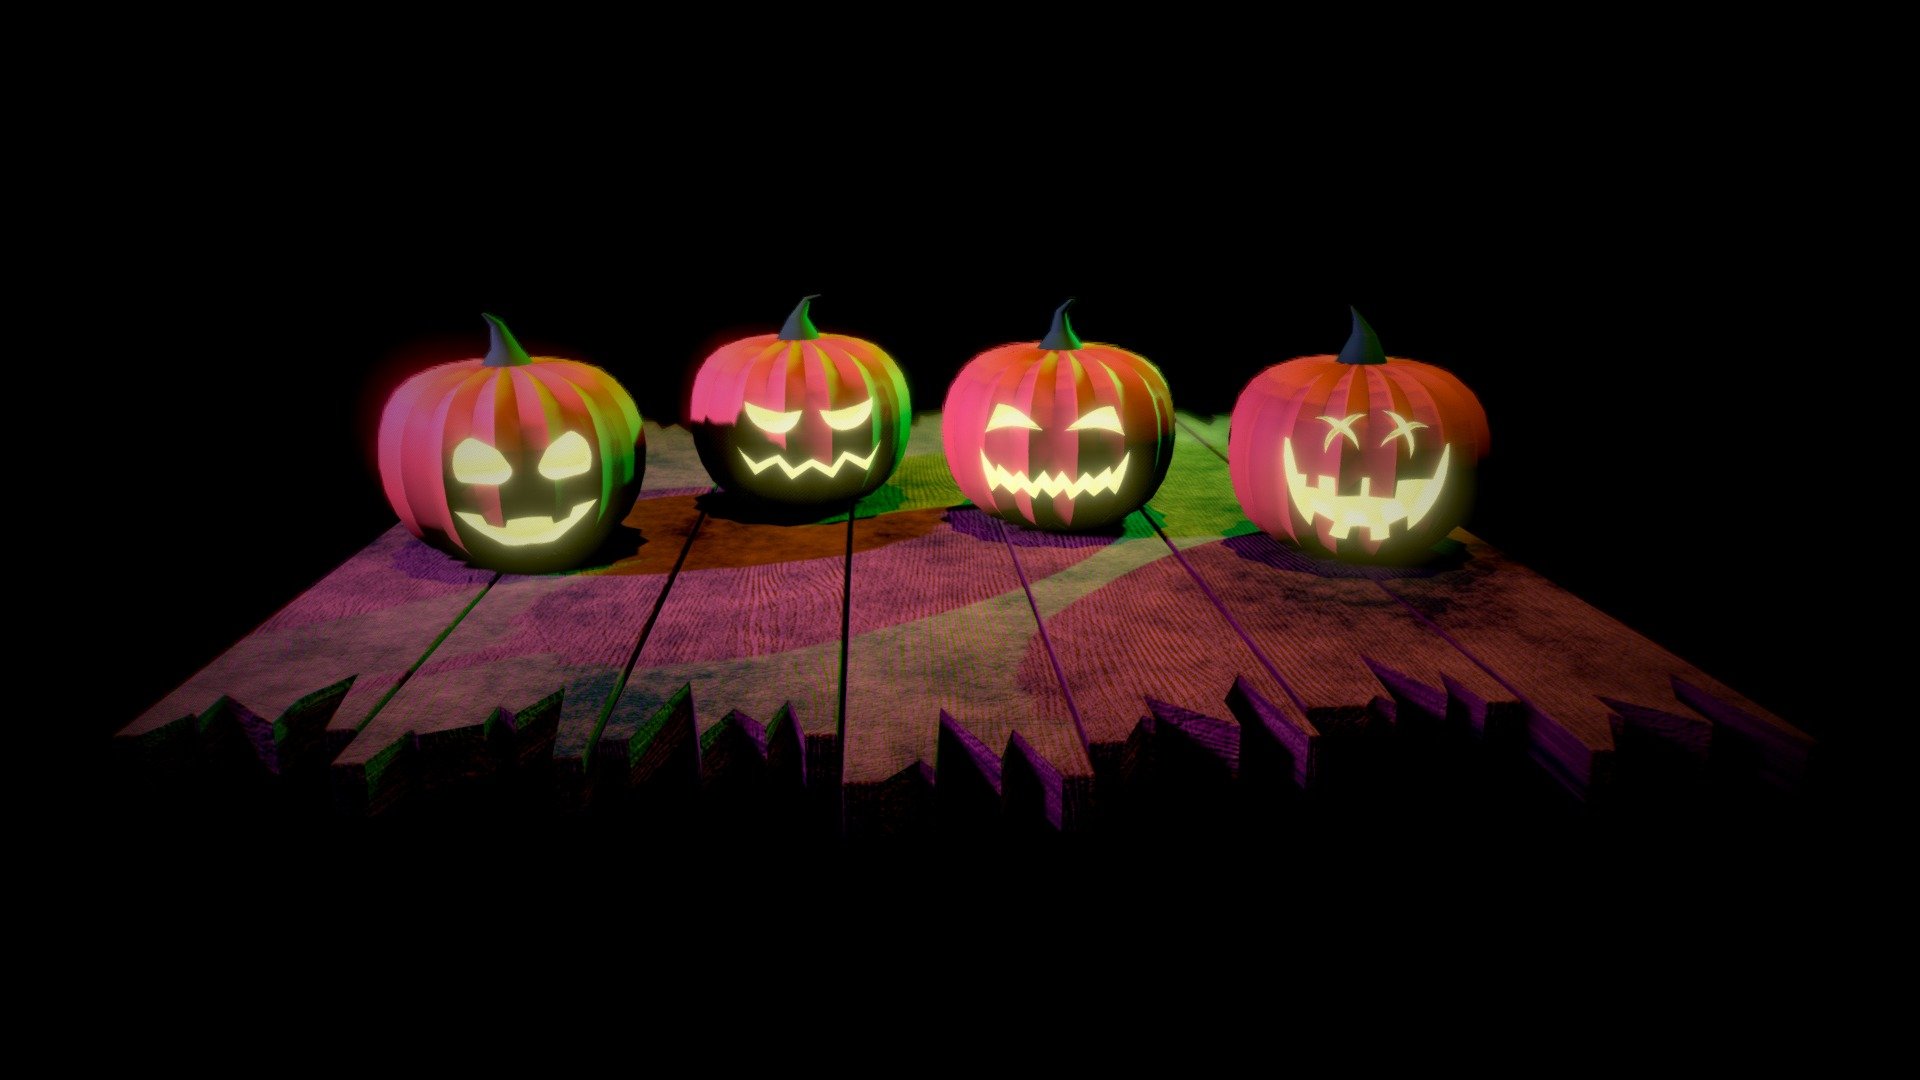 Low poly Halloween Pumkins for your Halloween project or event, it suitable for any visual production, advertising, game asset, illustration, 3d lowpoly asset. made in blender 3.2. 

Texture maps (Albedo, Roughness, Emission, and Normal Map (for wood)) With UV Layer non overlapping 3d model